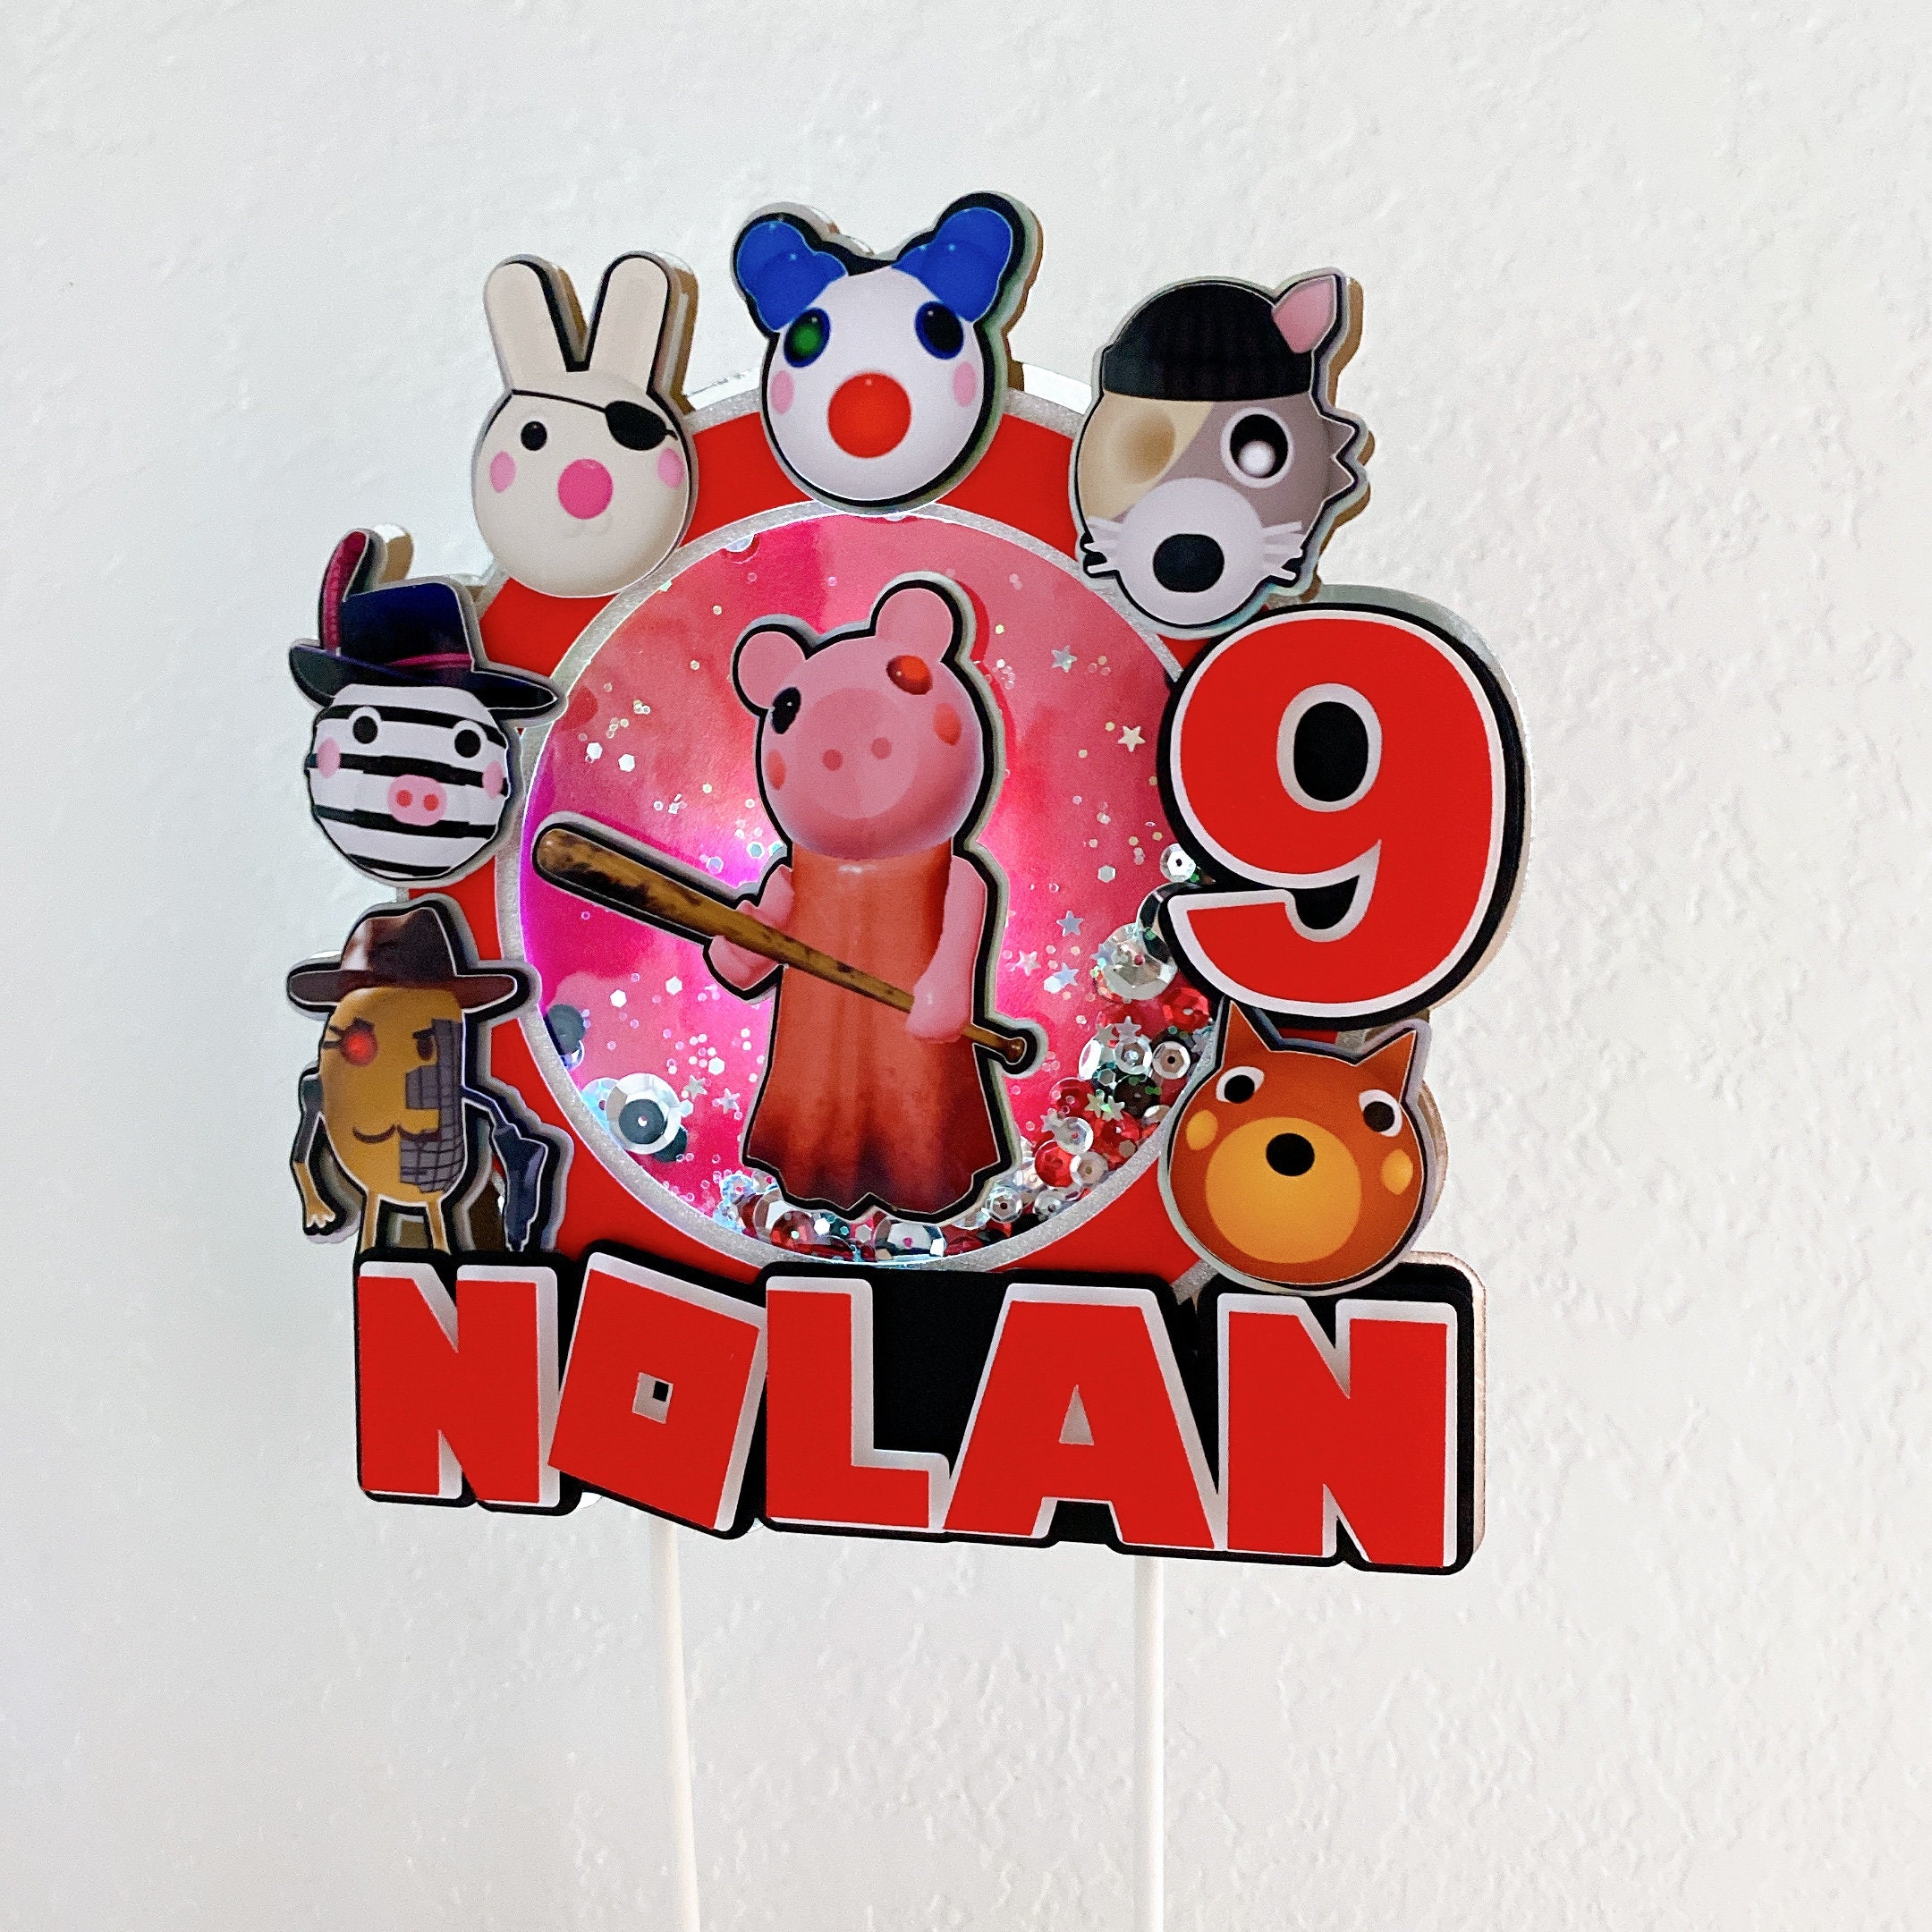 Piggy Roblox Magnets for Sale